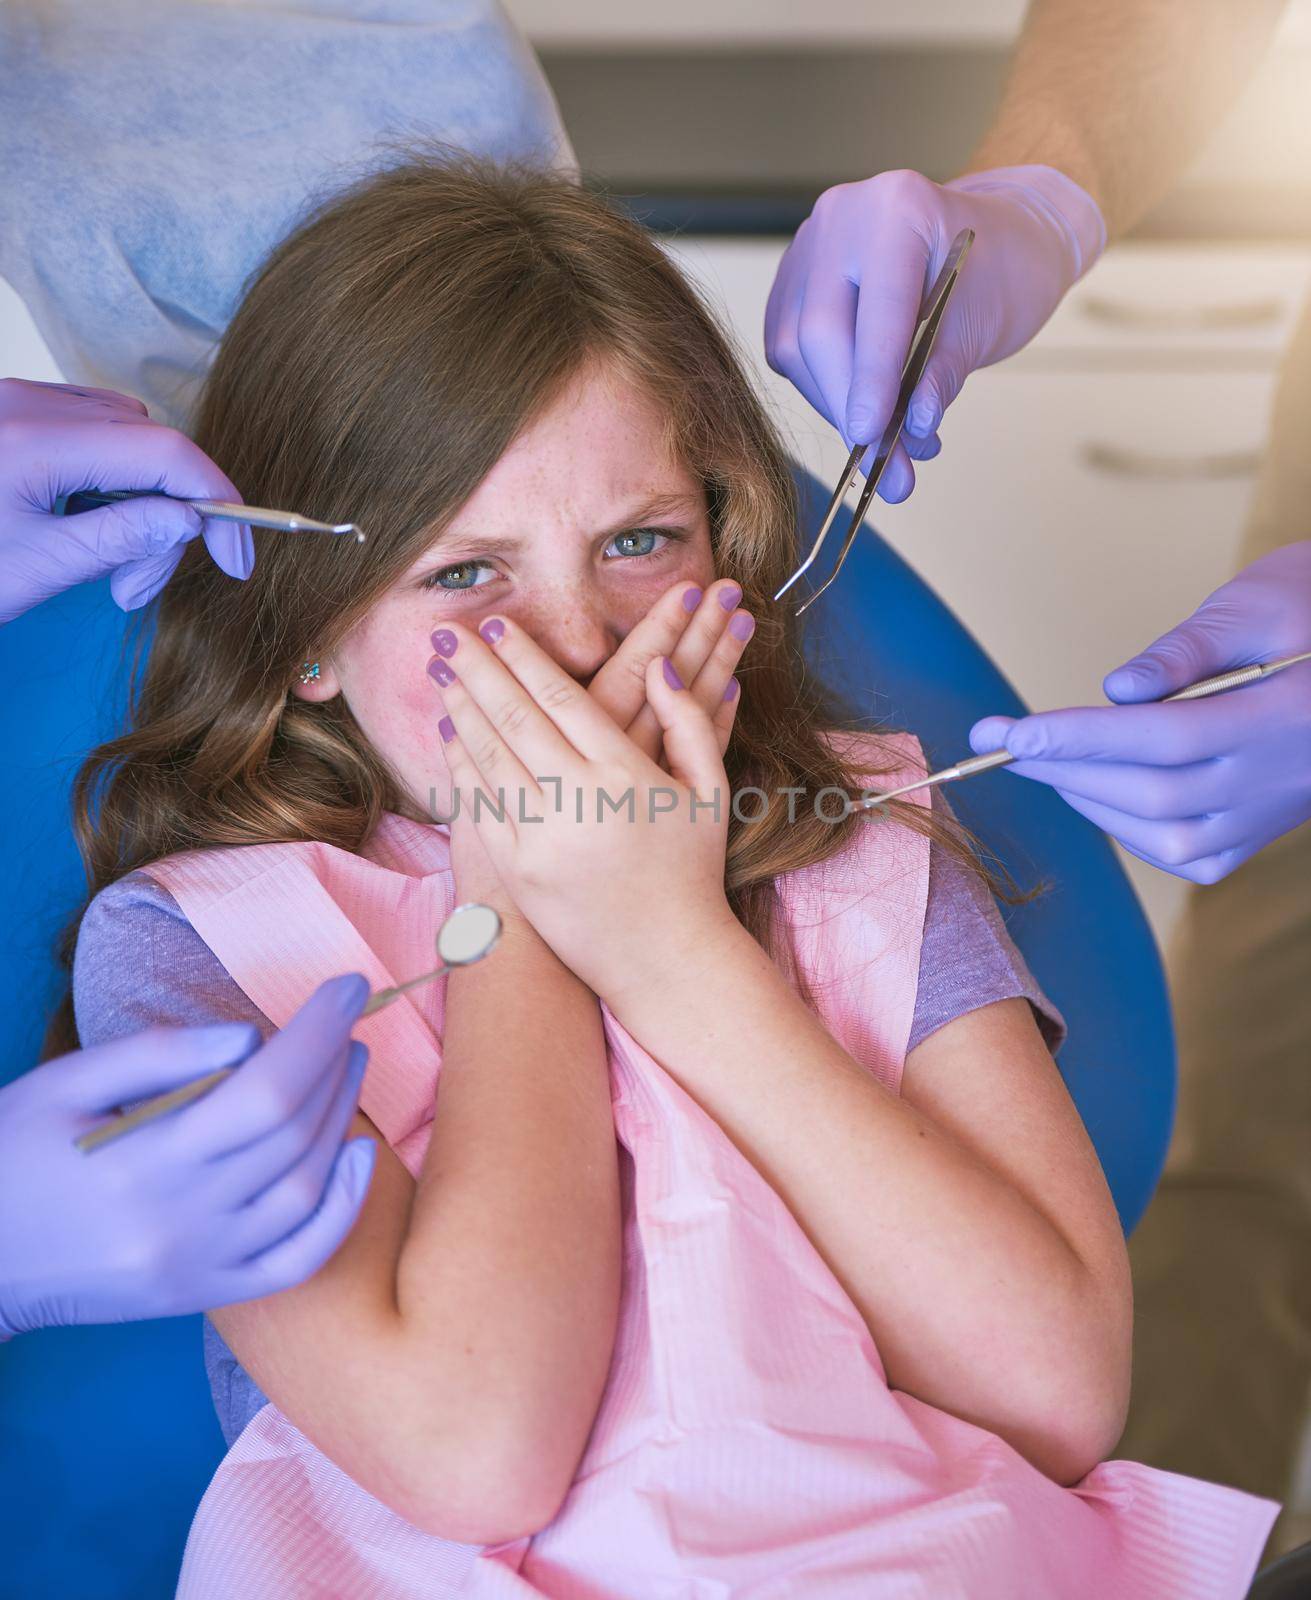 Childrens dental anxiety is very common. Shot of a little girl looking terrified as dentists get ready to examine her. by YuriArcurs